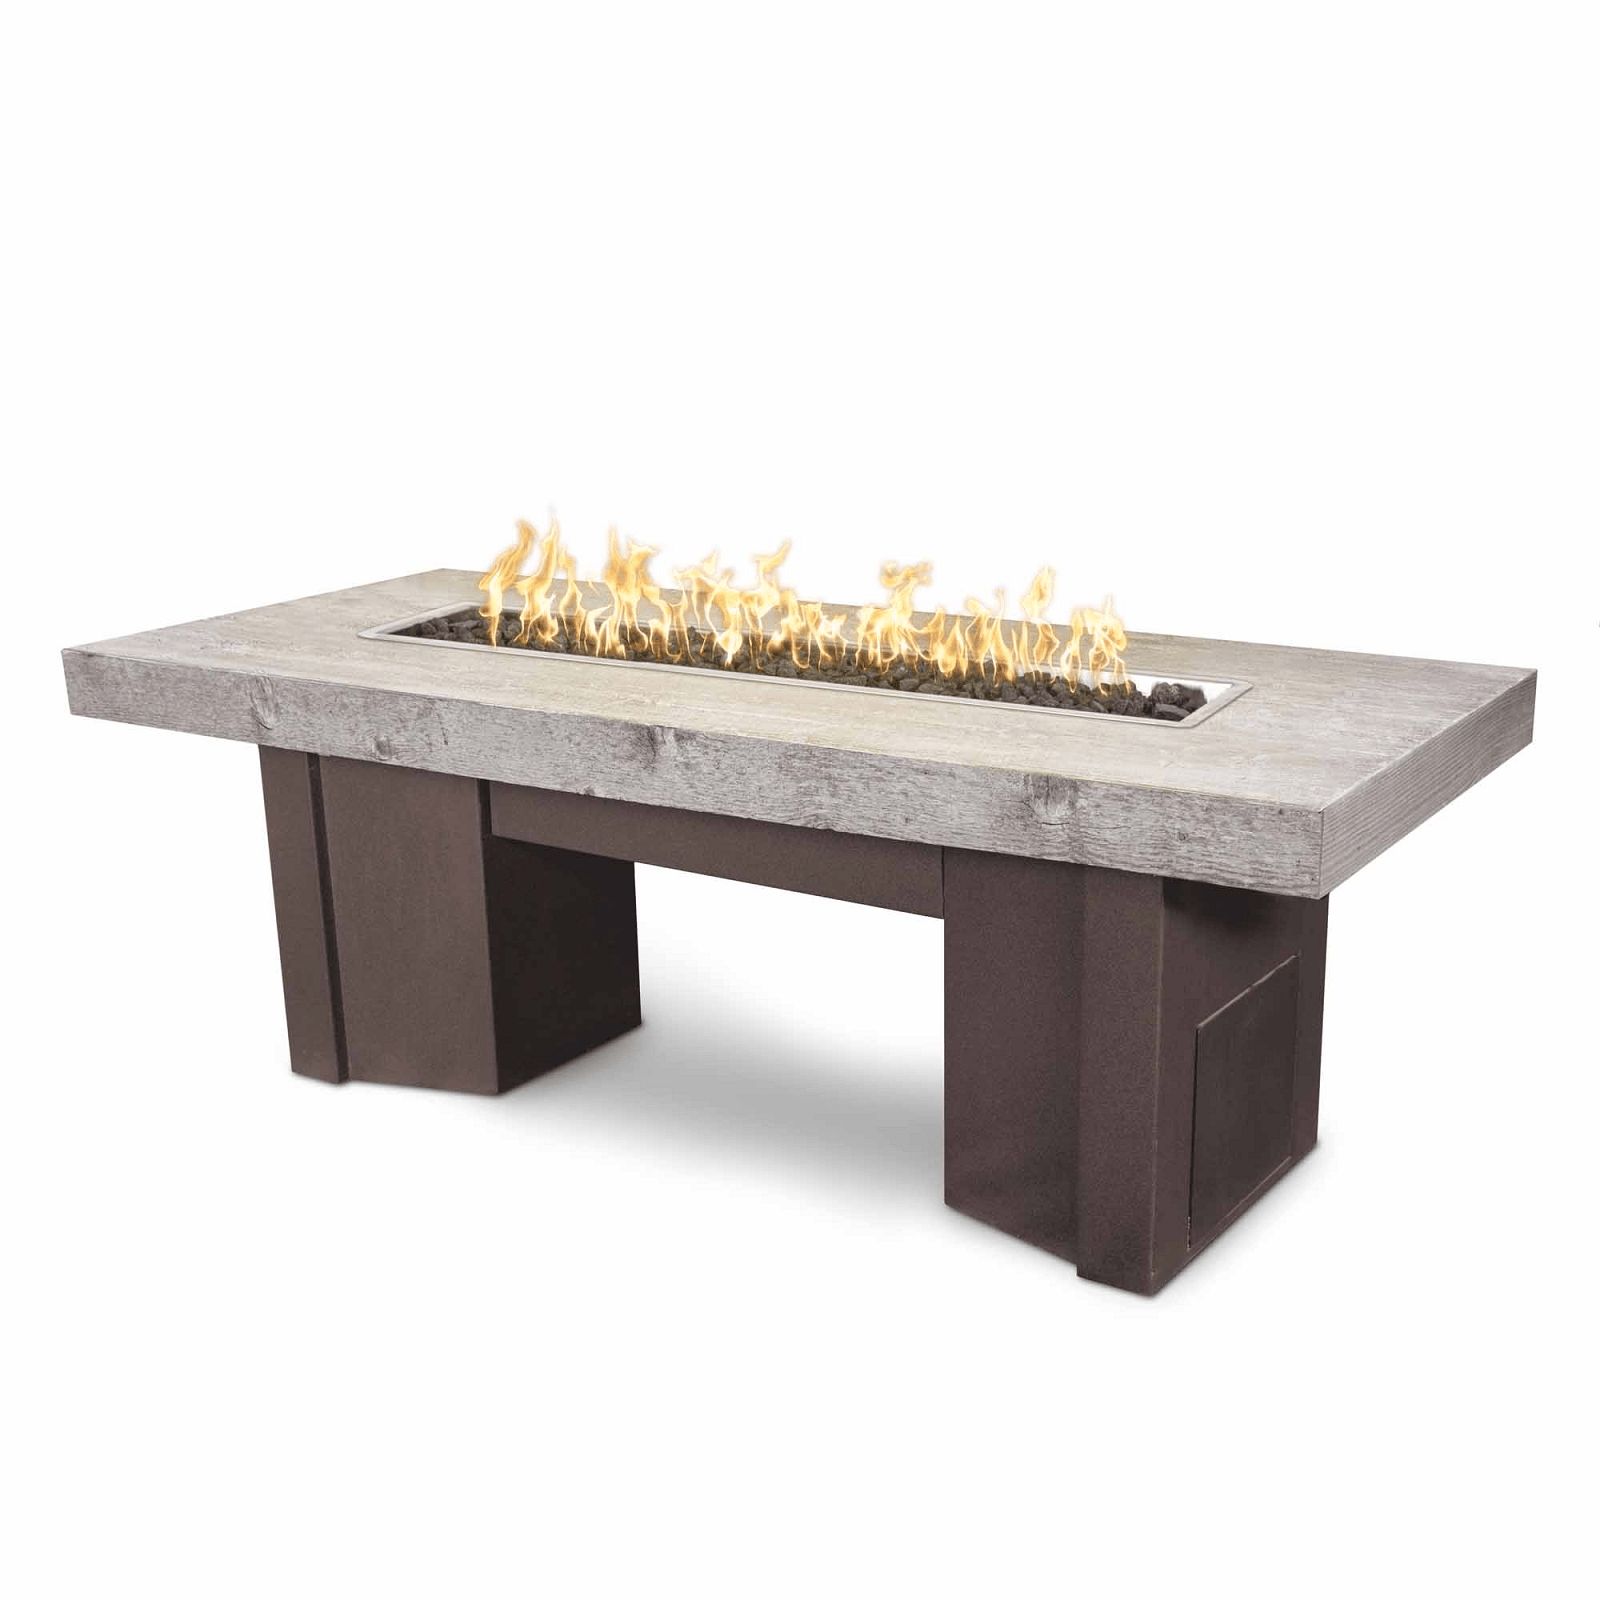 The Outdoor Plus Fire Features The Outdoor Plus 78" Alameda Fire Table Wood Grain - 12V Electronic Ignition / OPT-ALMWG78E12V